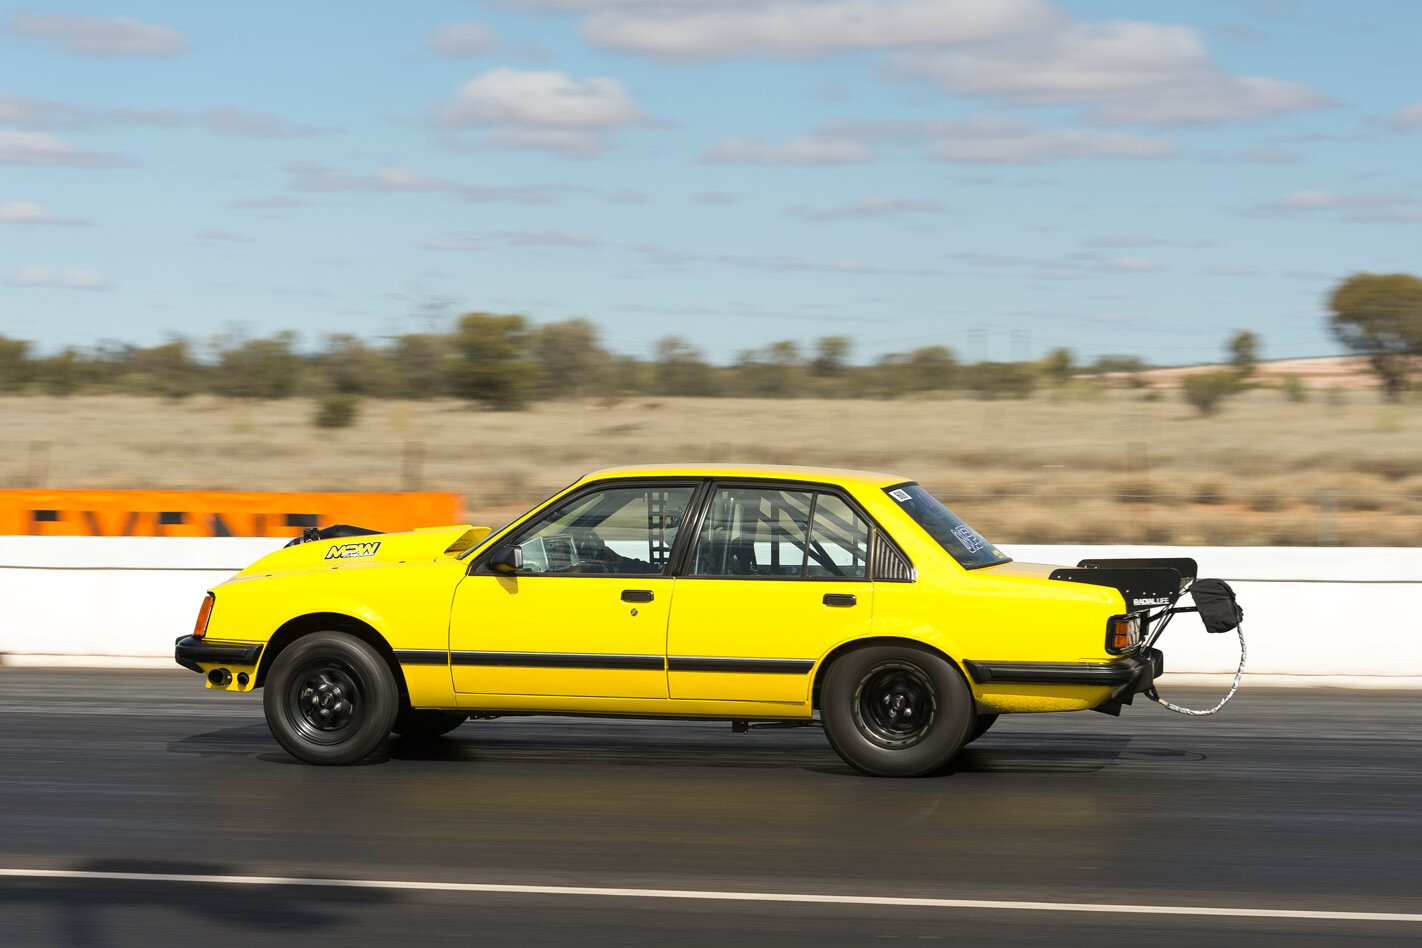 TWIN-TURBO 427 LS VC COMMODORE ‘ISFAIR’